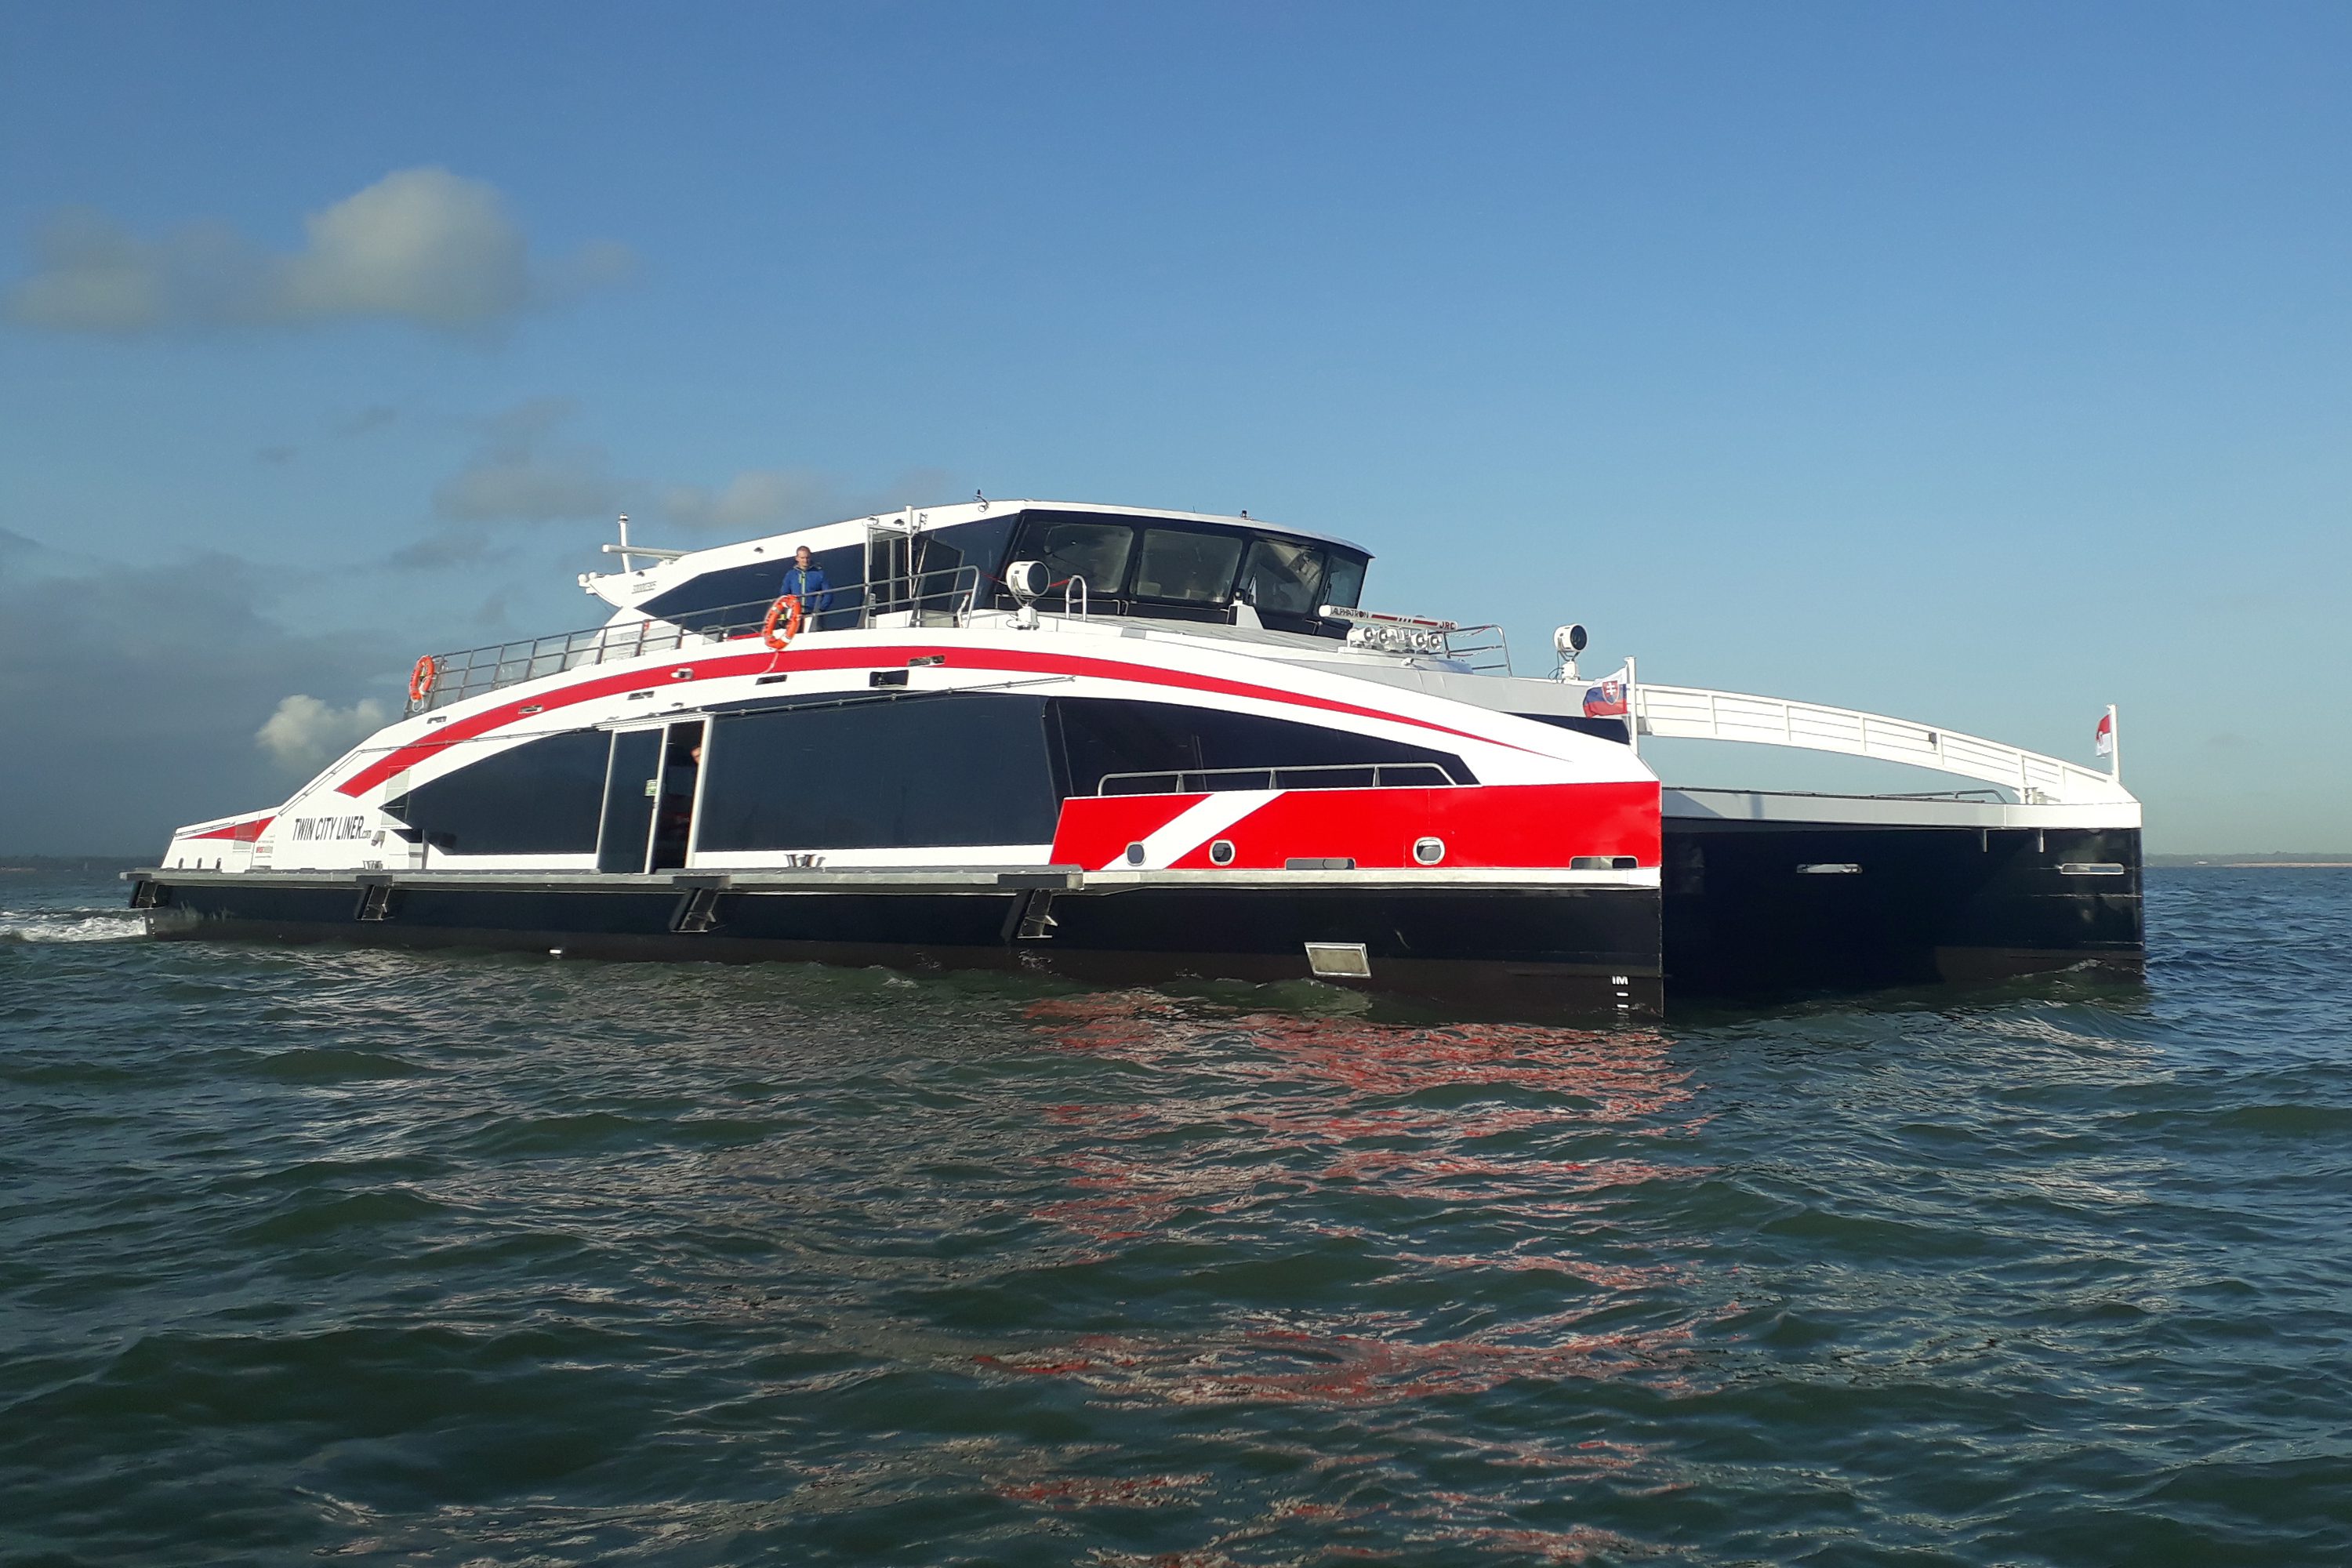 Danube High-Speed Low-Wash Ferry Offers New Level of Efficiency and Reliability